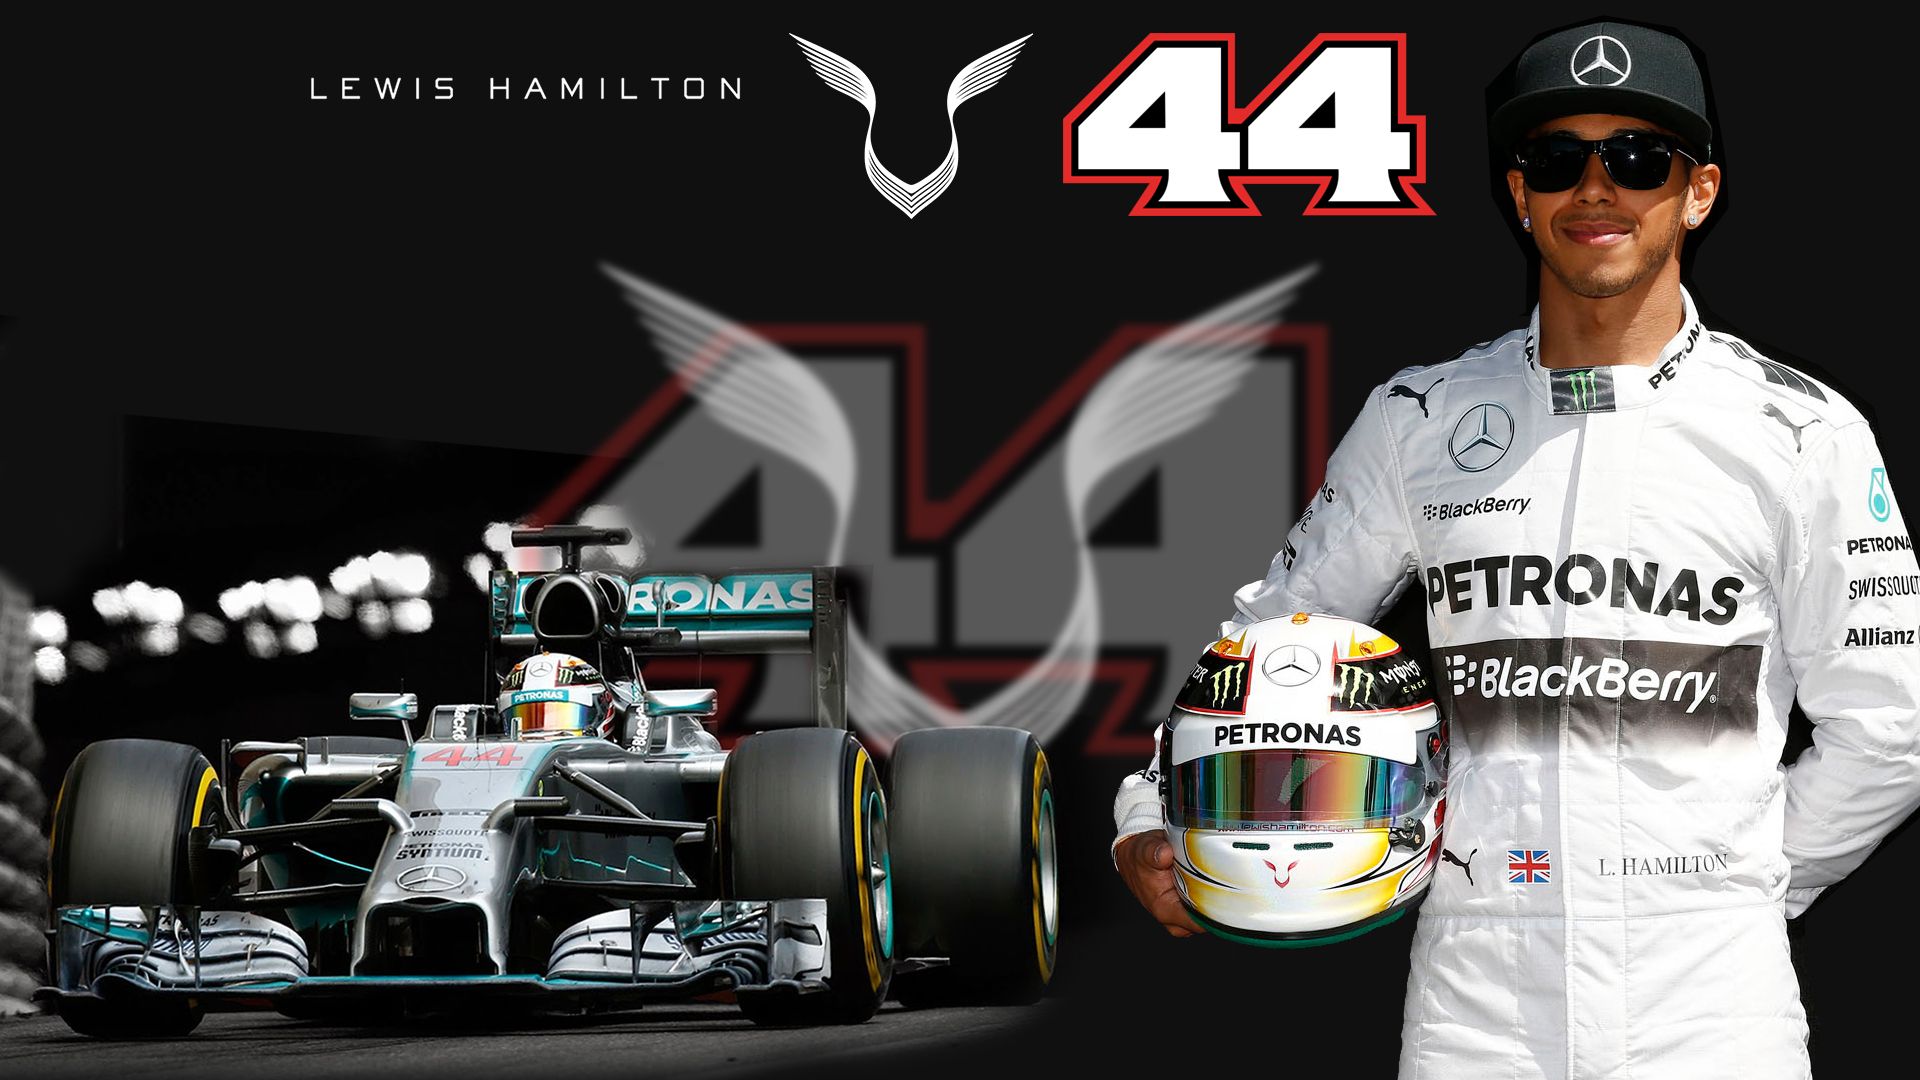 Lewis Hamilton Wallpapers HD Collection For Free Download